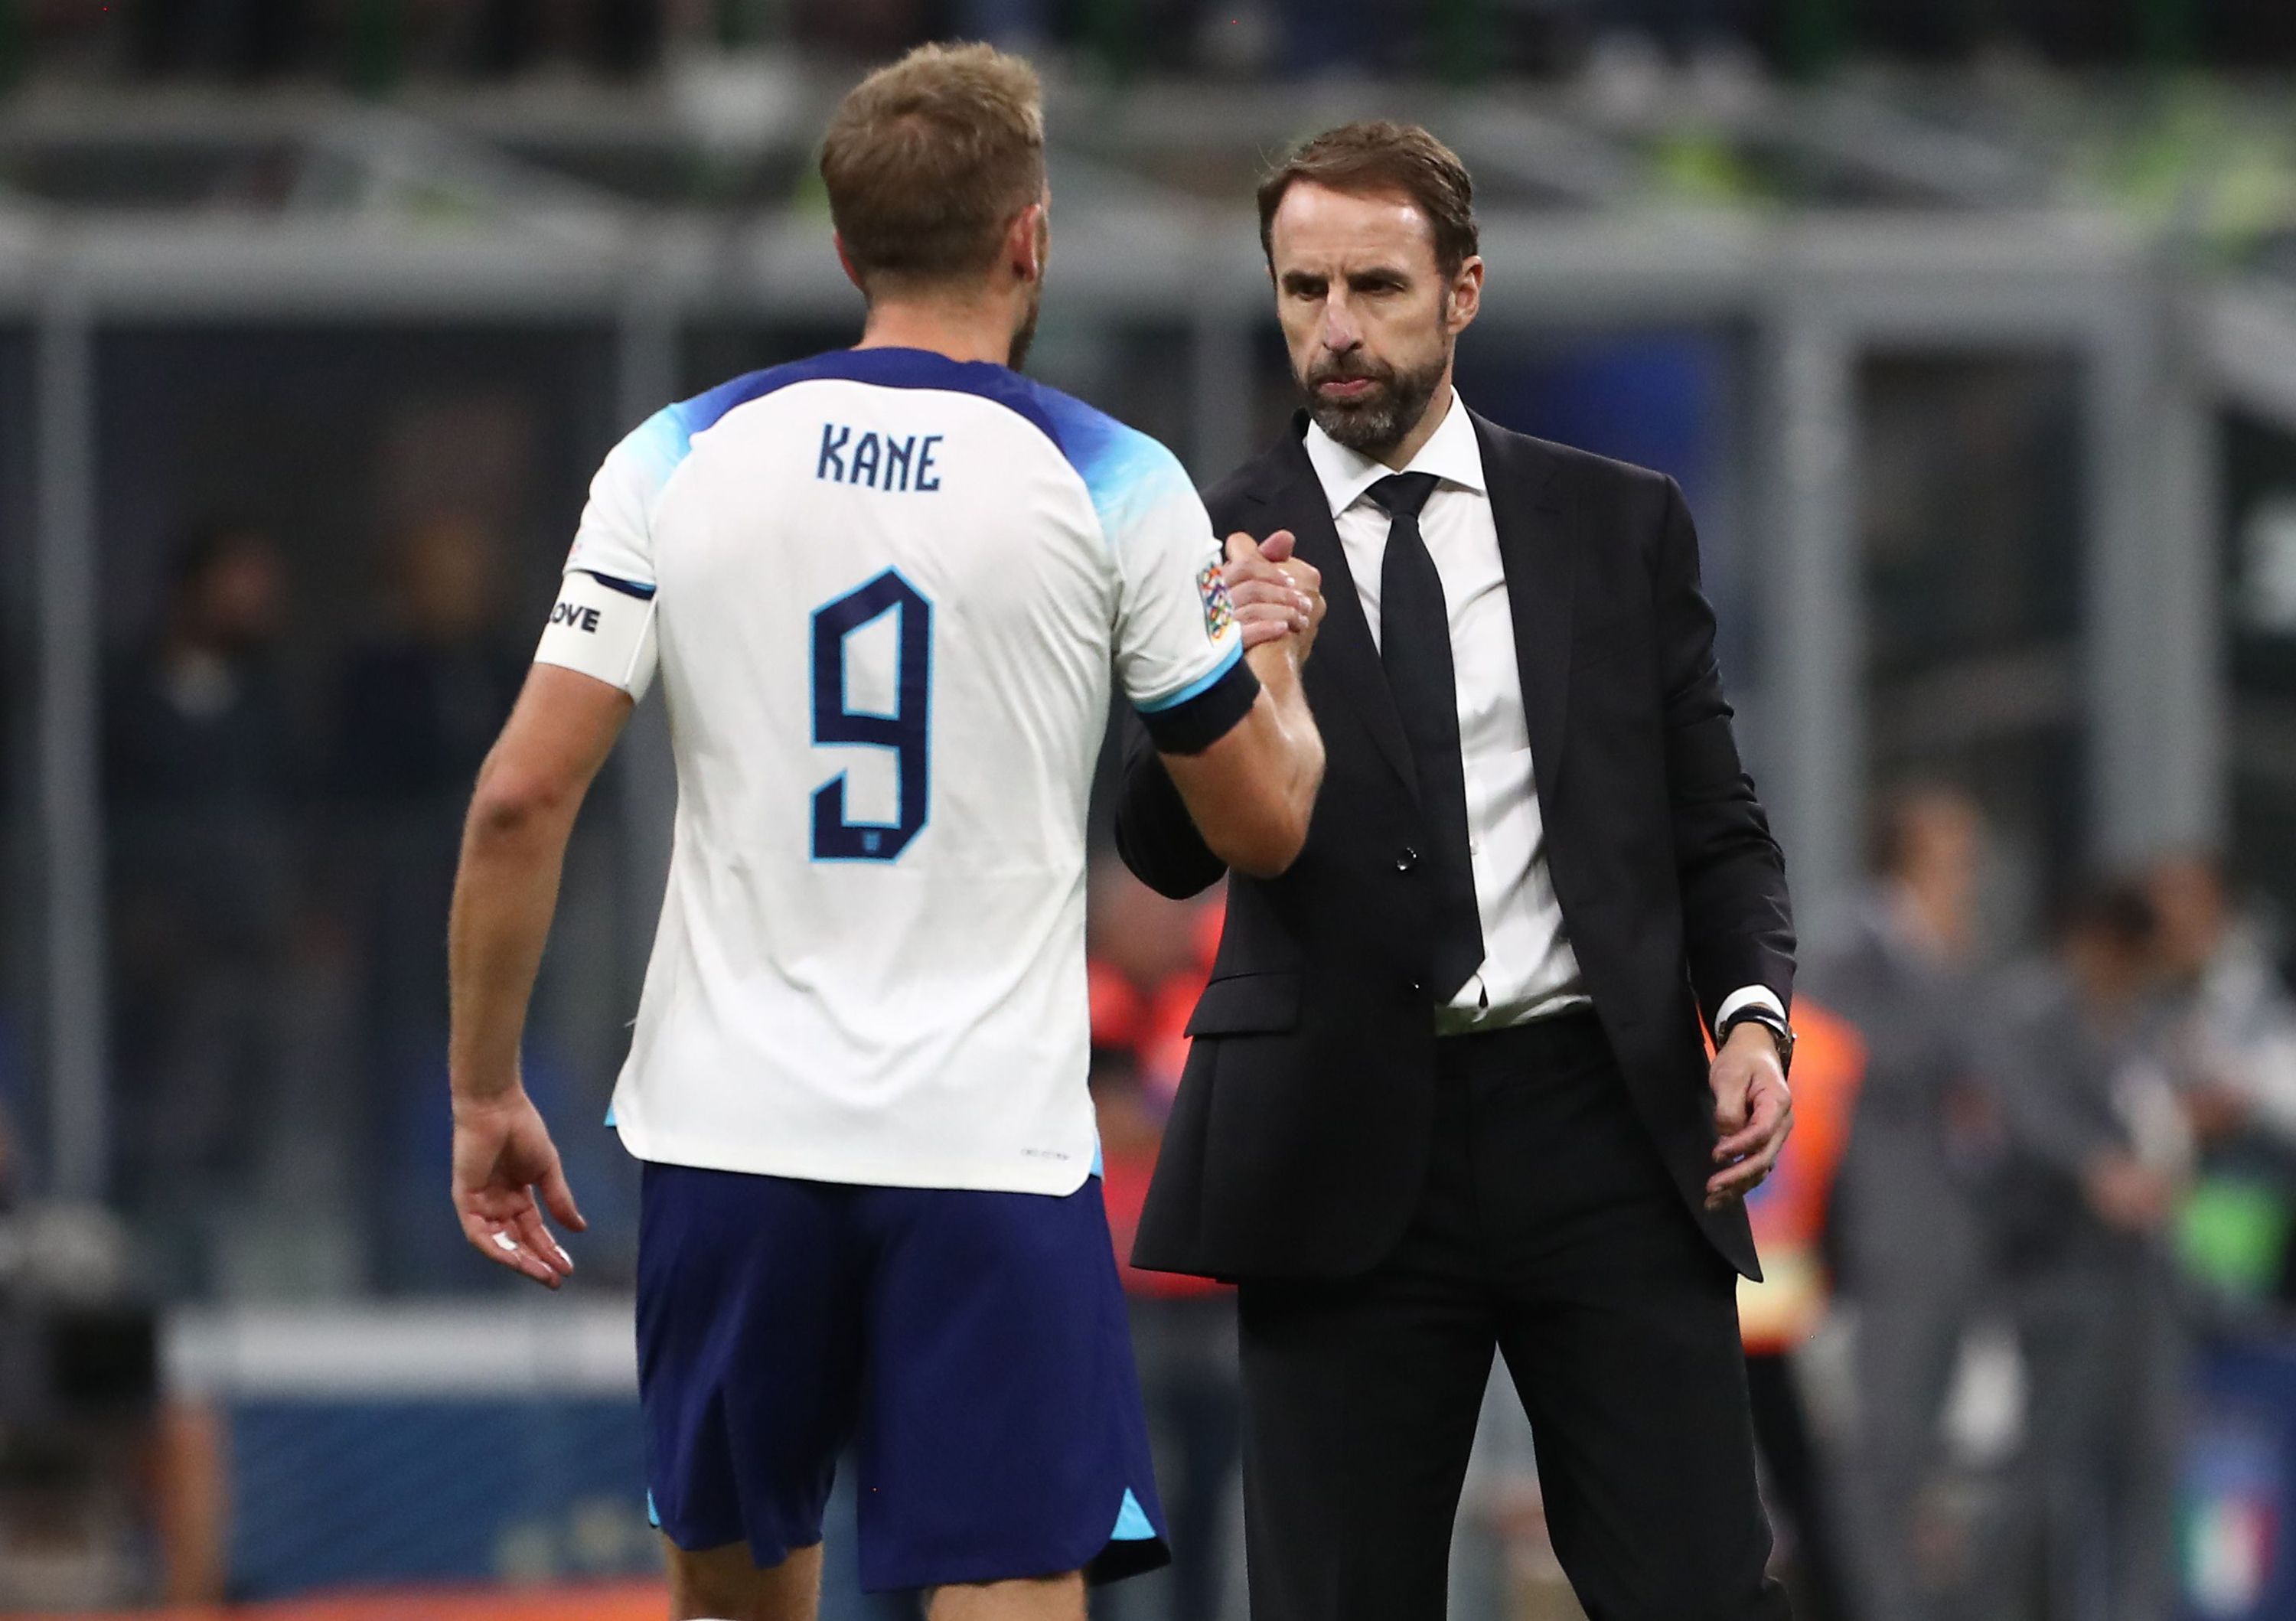 Harry Kane is expected to start upfront for England at 2022 World Cup